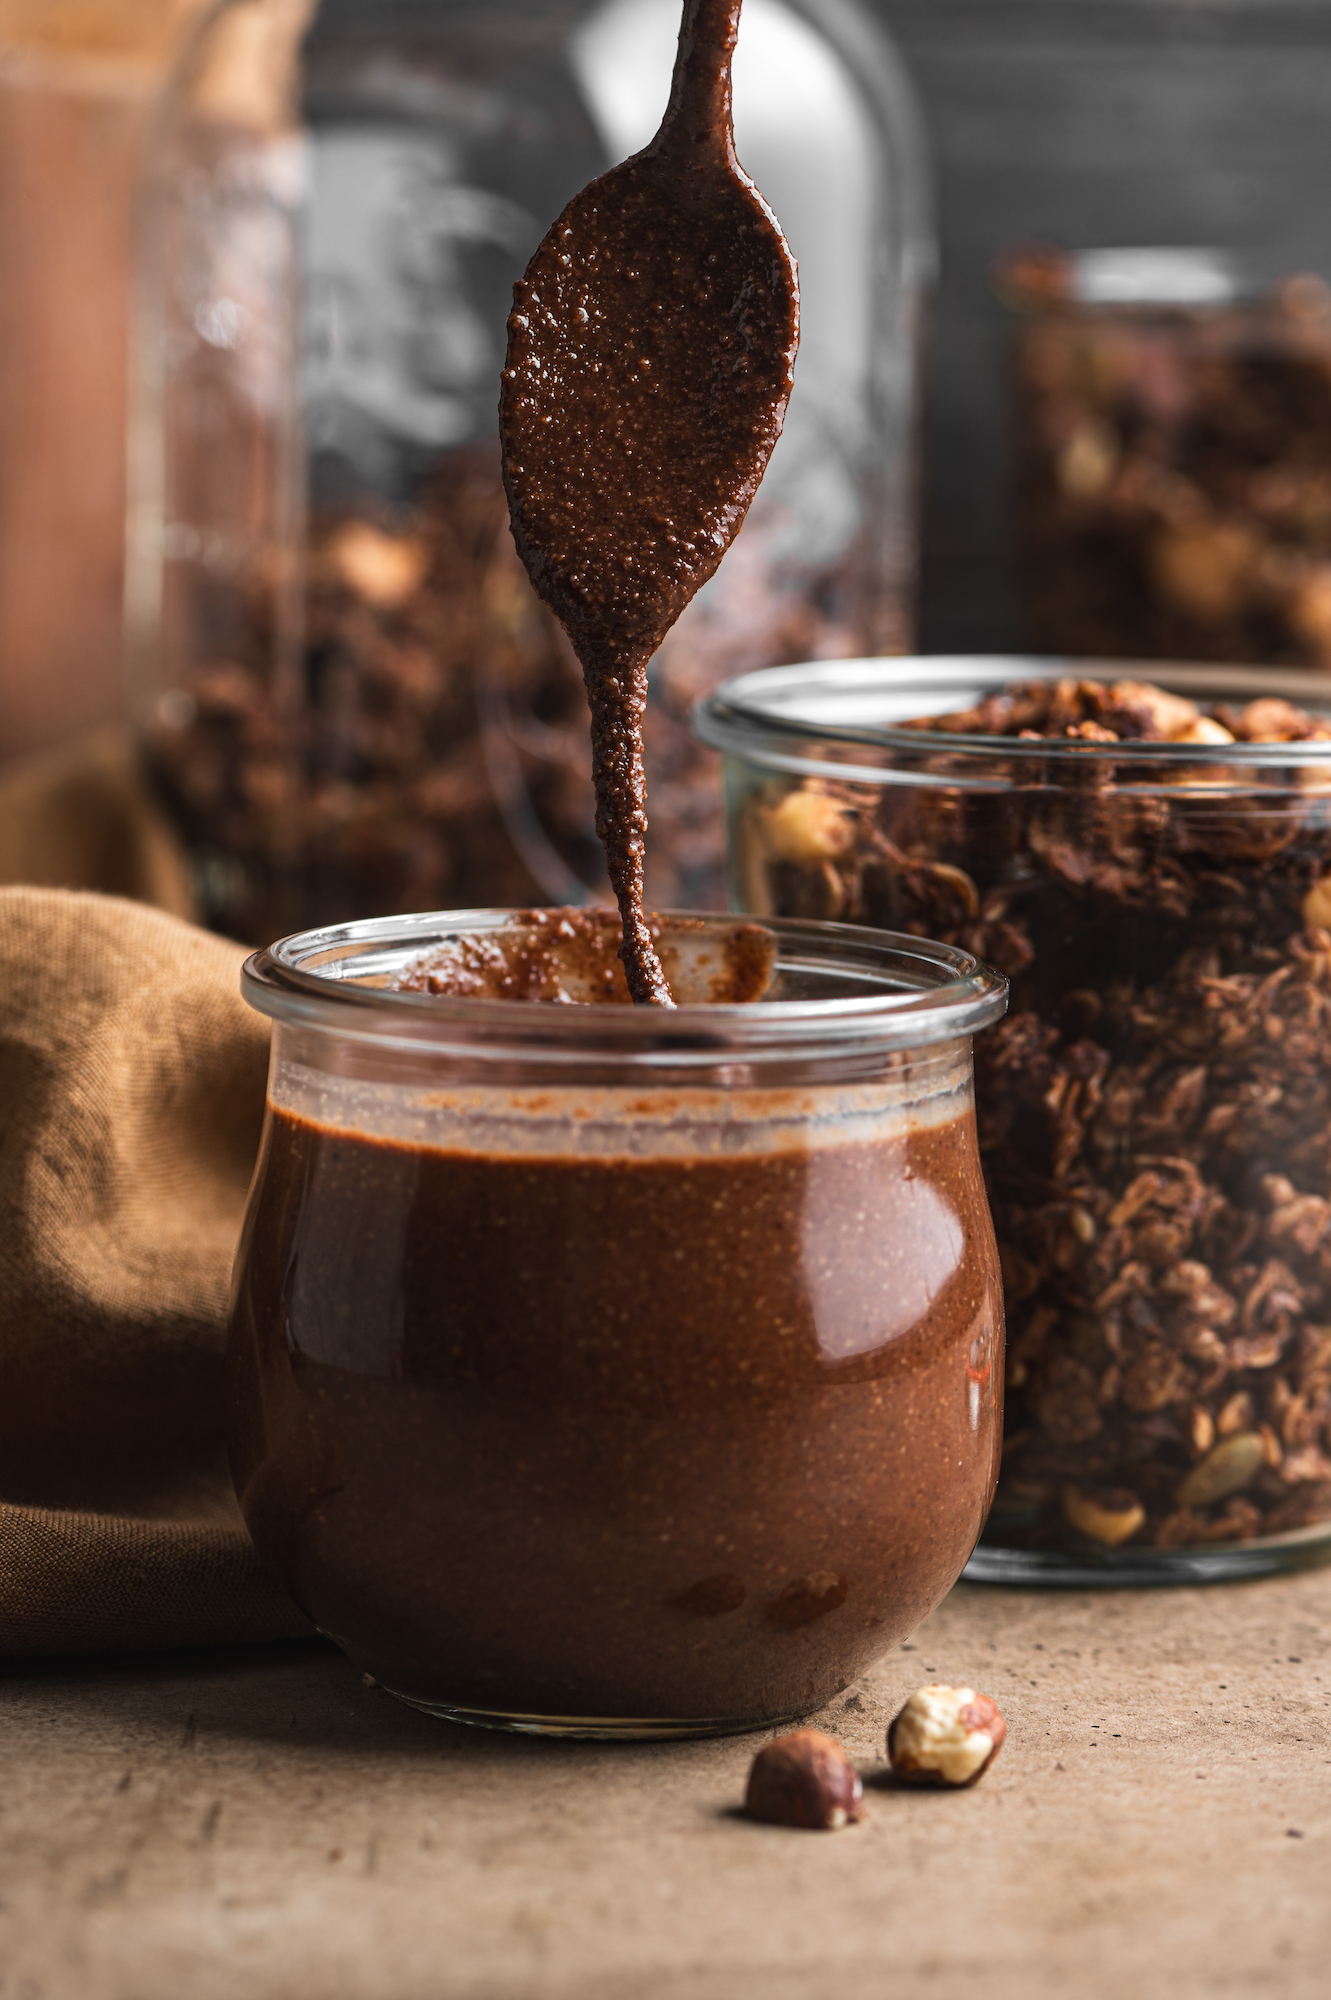 spoon filling a glass jar with freshly homemade chocolate nutella by teri-ann carty